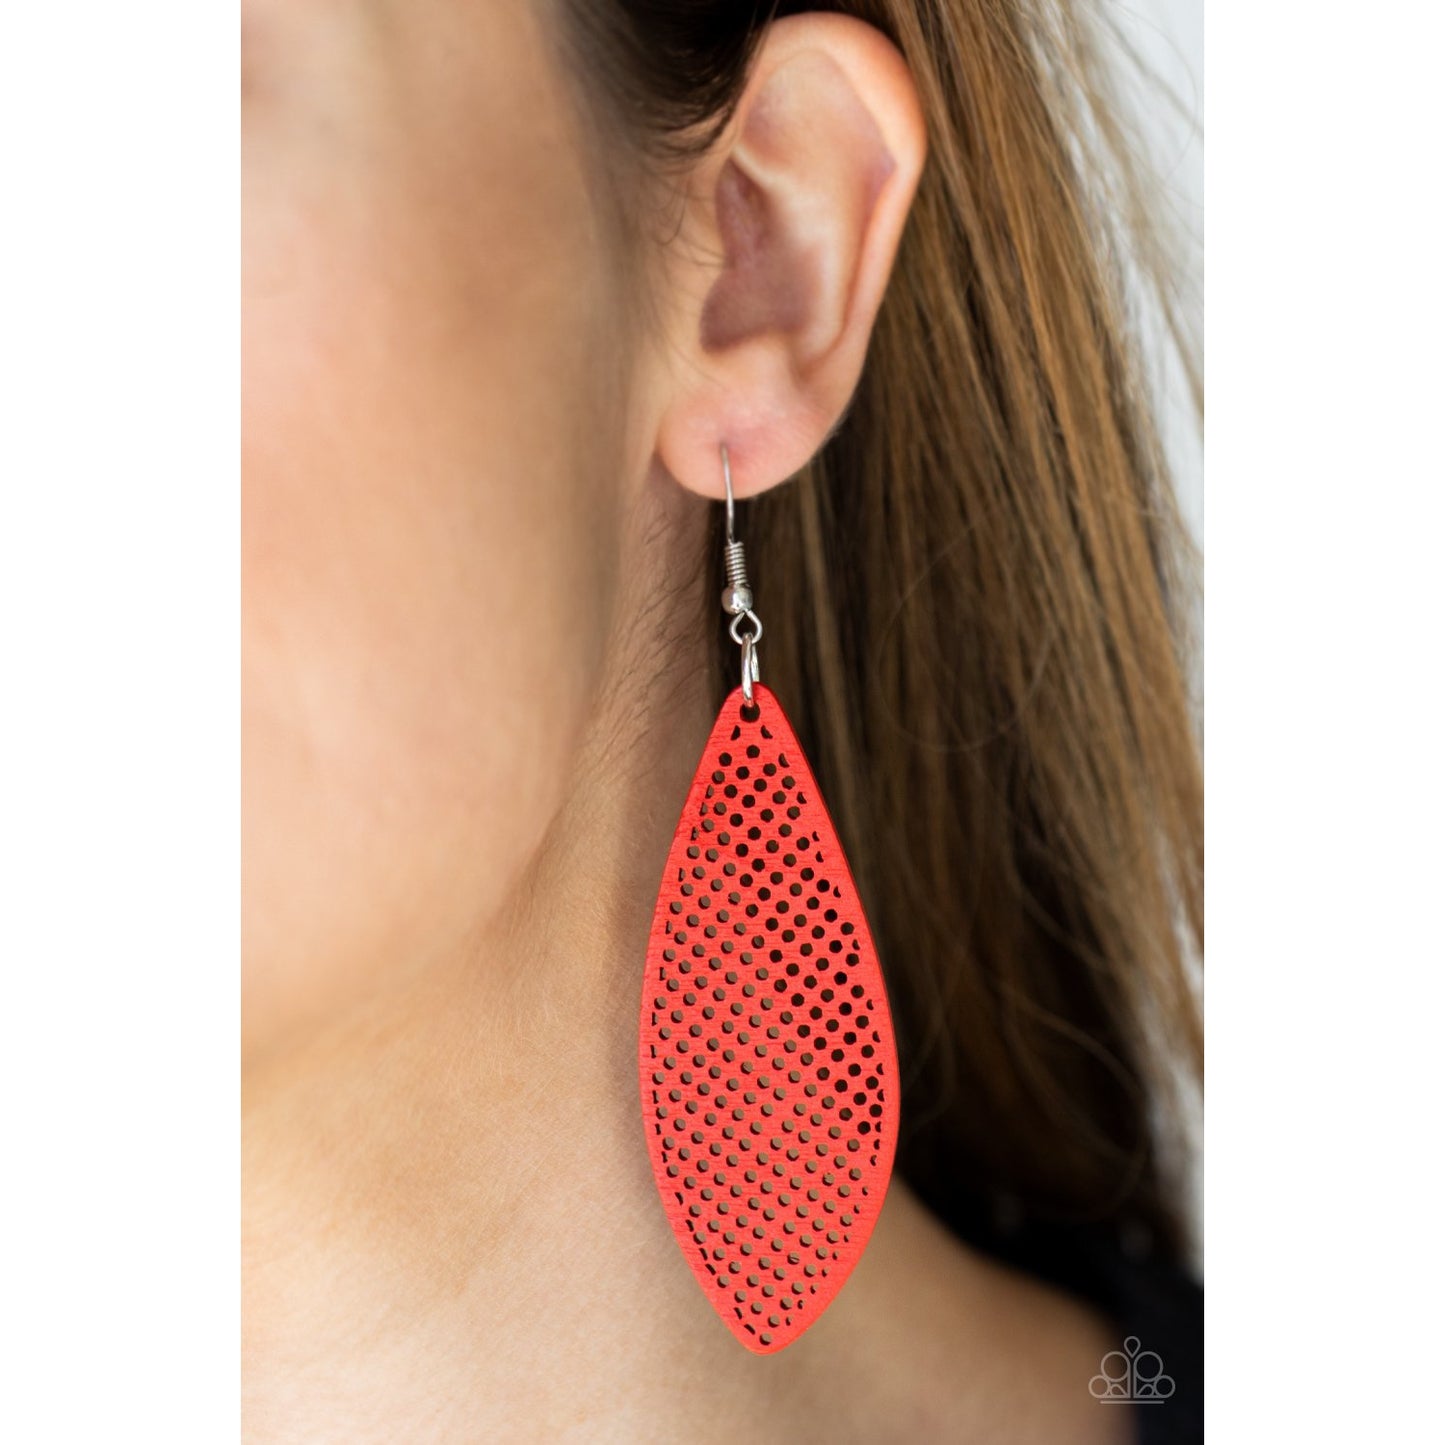 Surf Scene - Red Wooden Earrings - Paparazzi Accessories - GlaMarous Titi Jewels